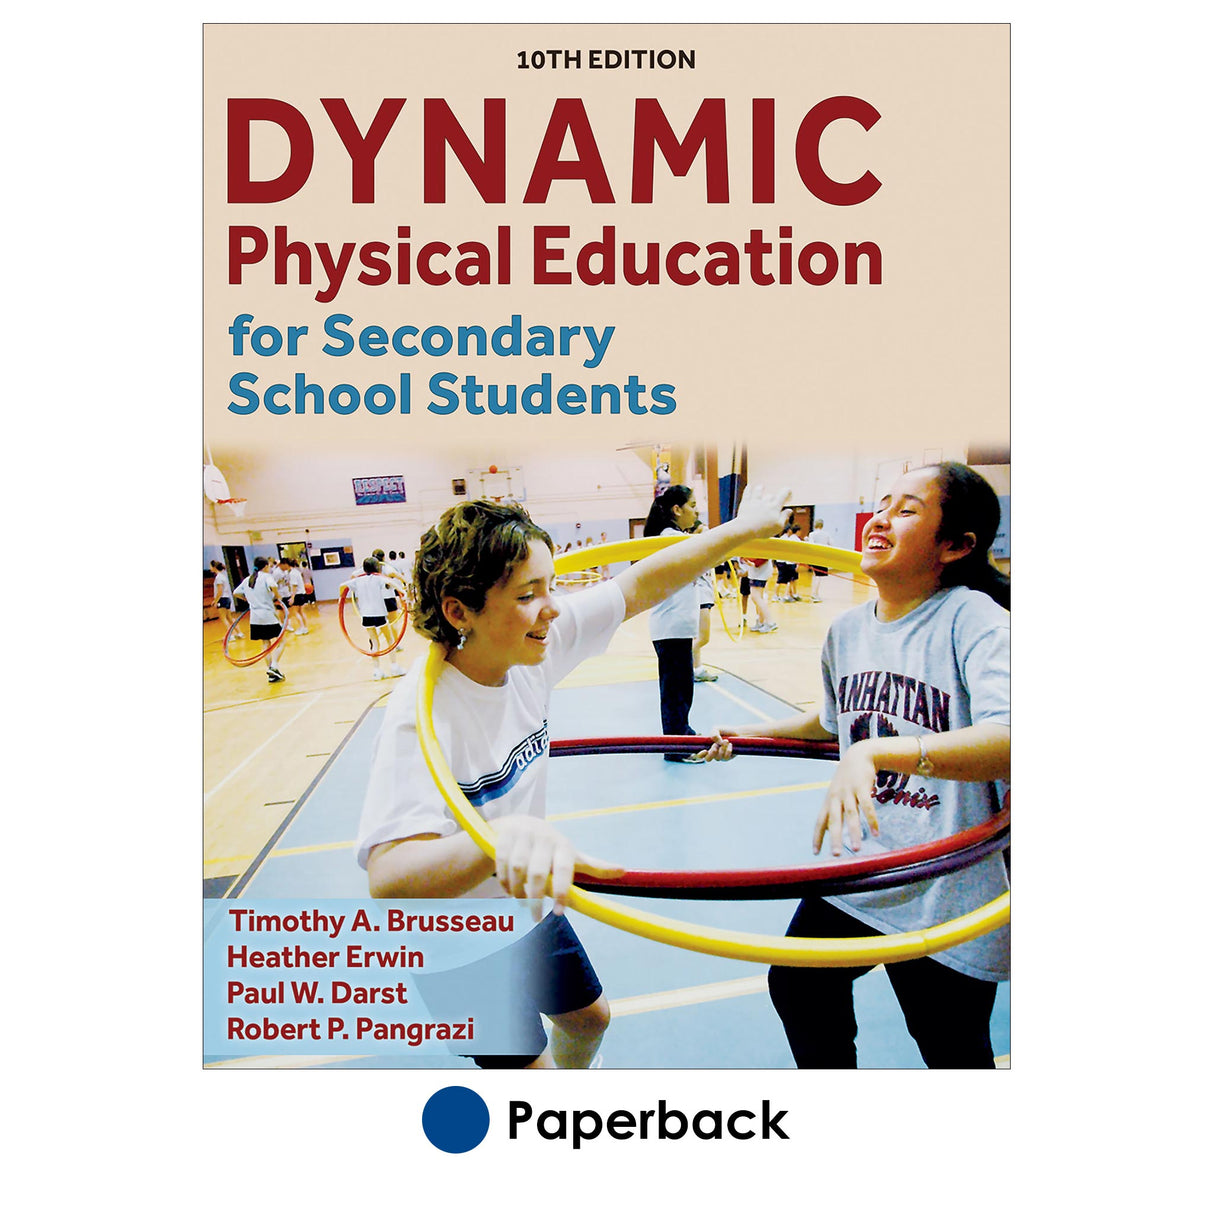 Dynamic Physical Education for Secondary School Students-10th Edition